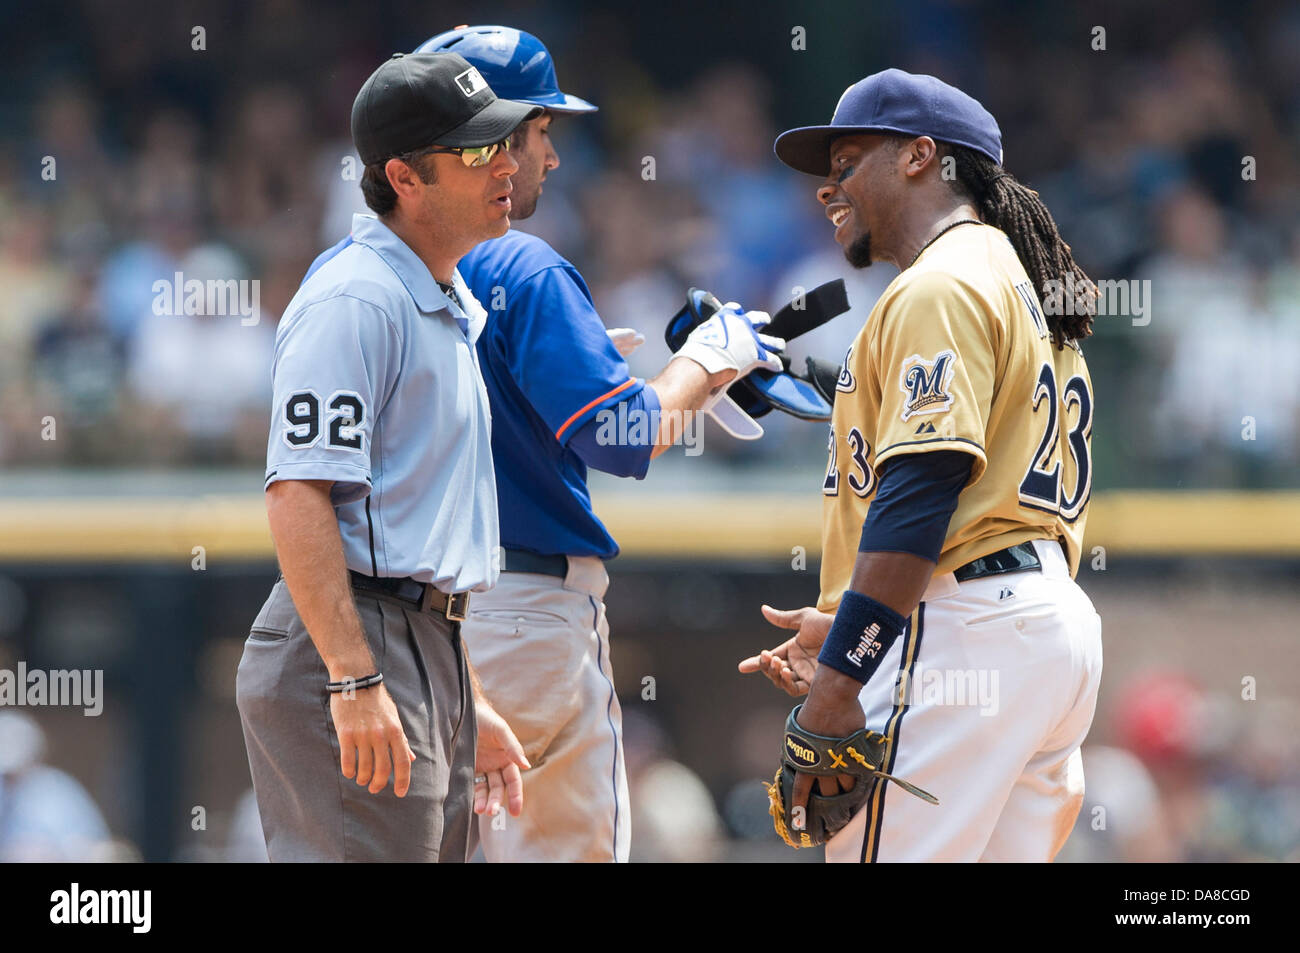 Milwaukee, Wisconsin, USA. 7th July, 2013. July 7, 2013: Milwaukee Brewers second baseman Rickie Weeks #23 discusses a call by umpire John Hirschbeck during the Major League Baseball game between the Milwaukee Brewers and the New York Mets at Miller Park in Milwaukee, WI. Mets win 2-1. John Fisher/CSM. Credit:  csm/Alamy Live News Stock Photo